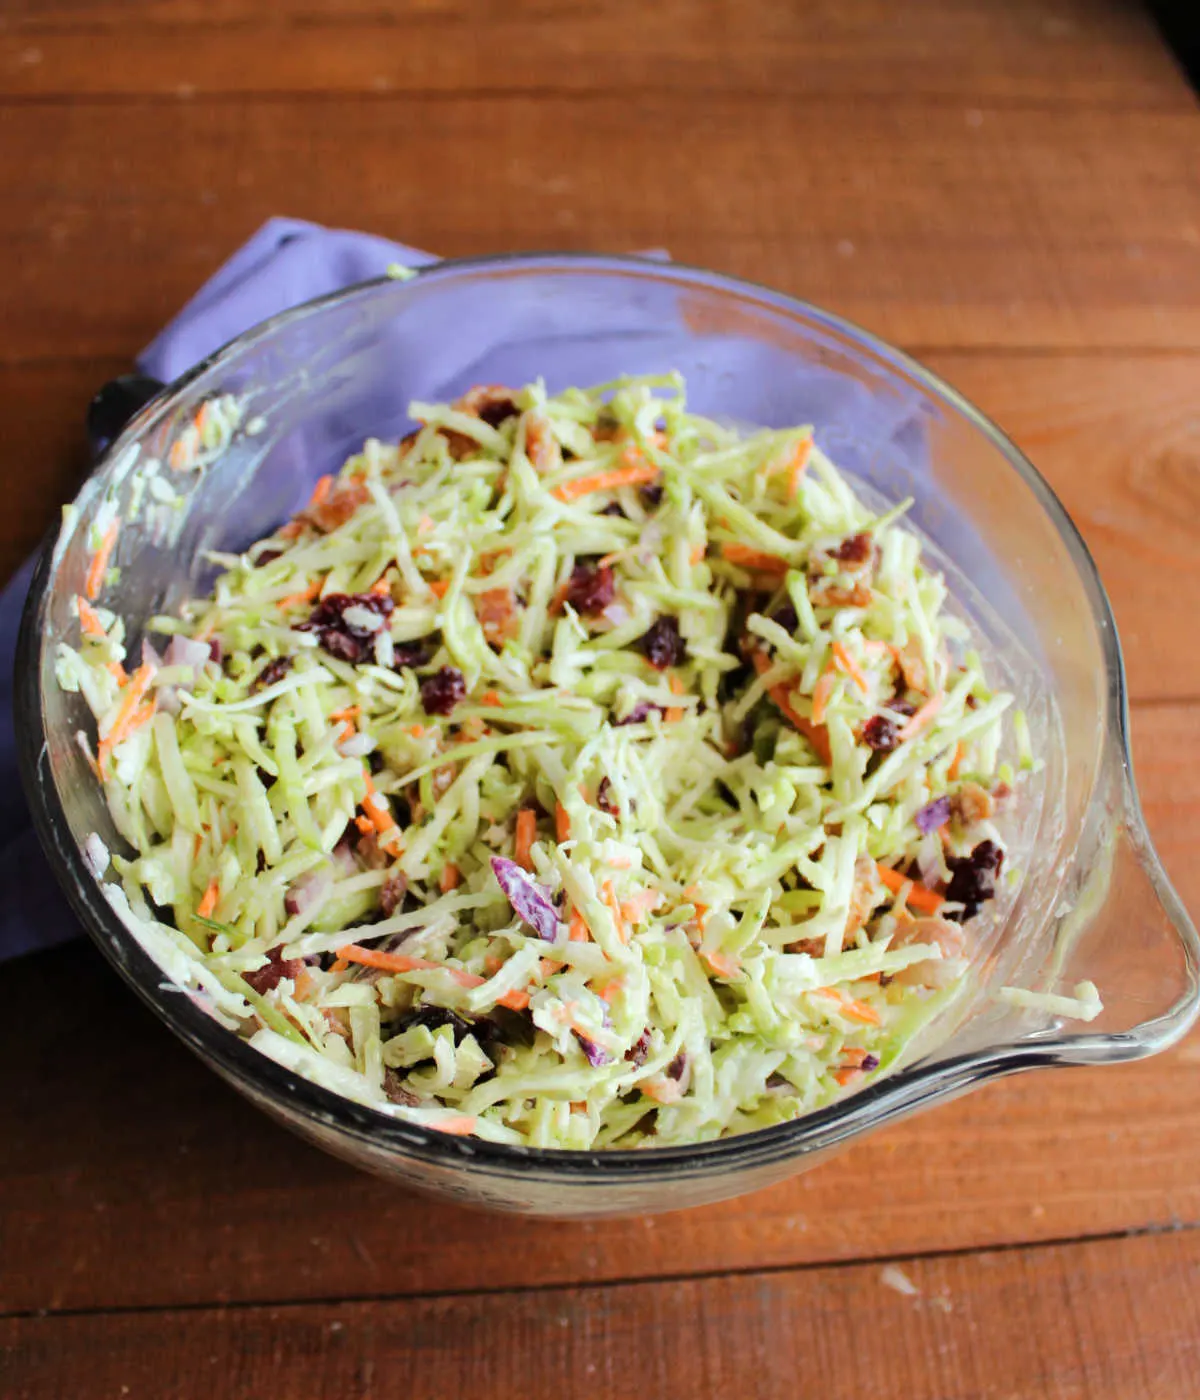 Freshly mixed broccoli slaw, ready to go in the refrigerator to chill.